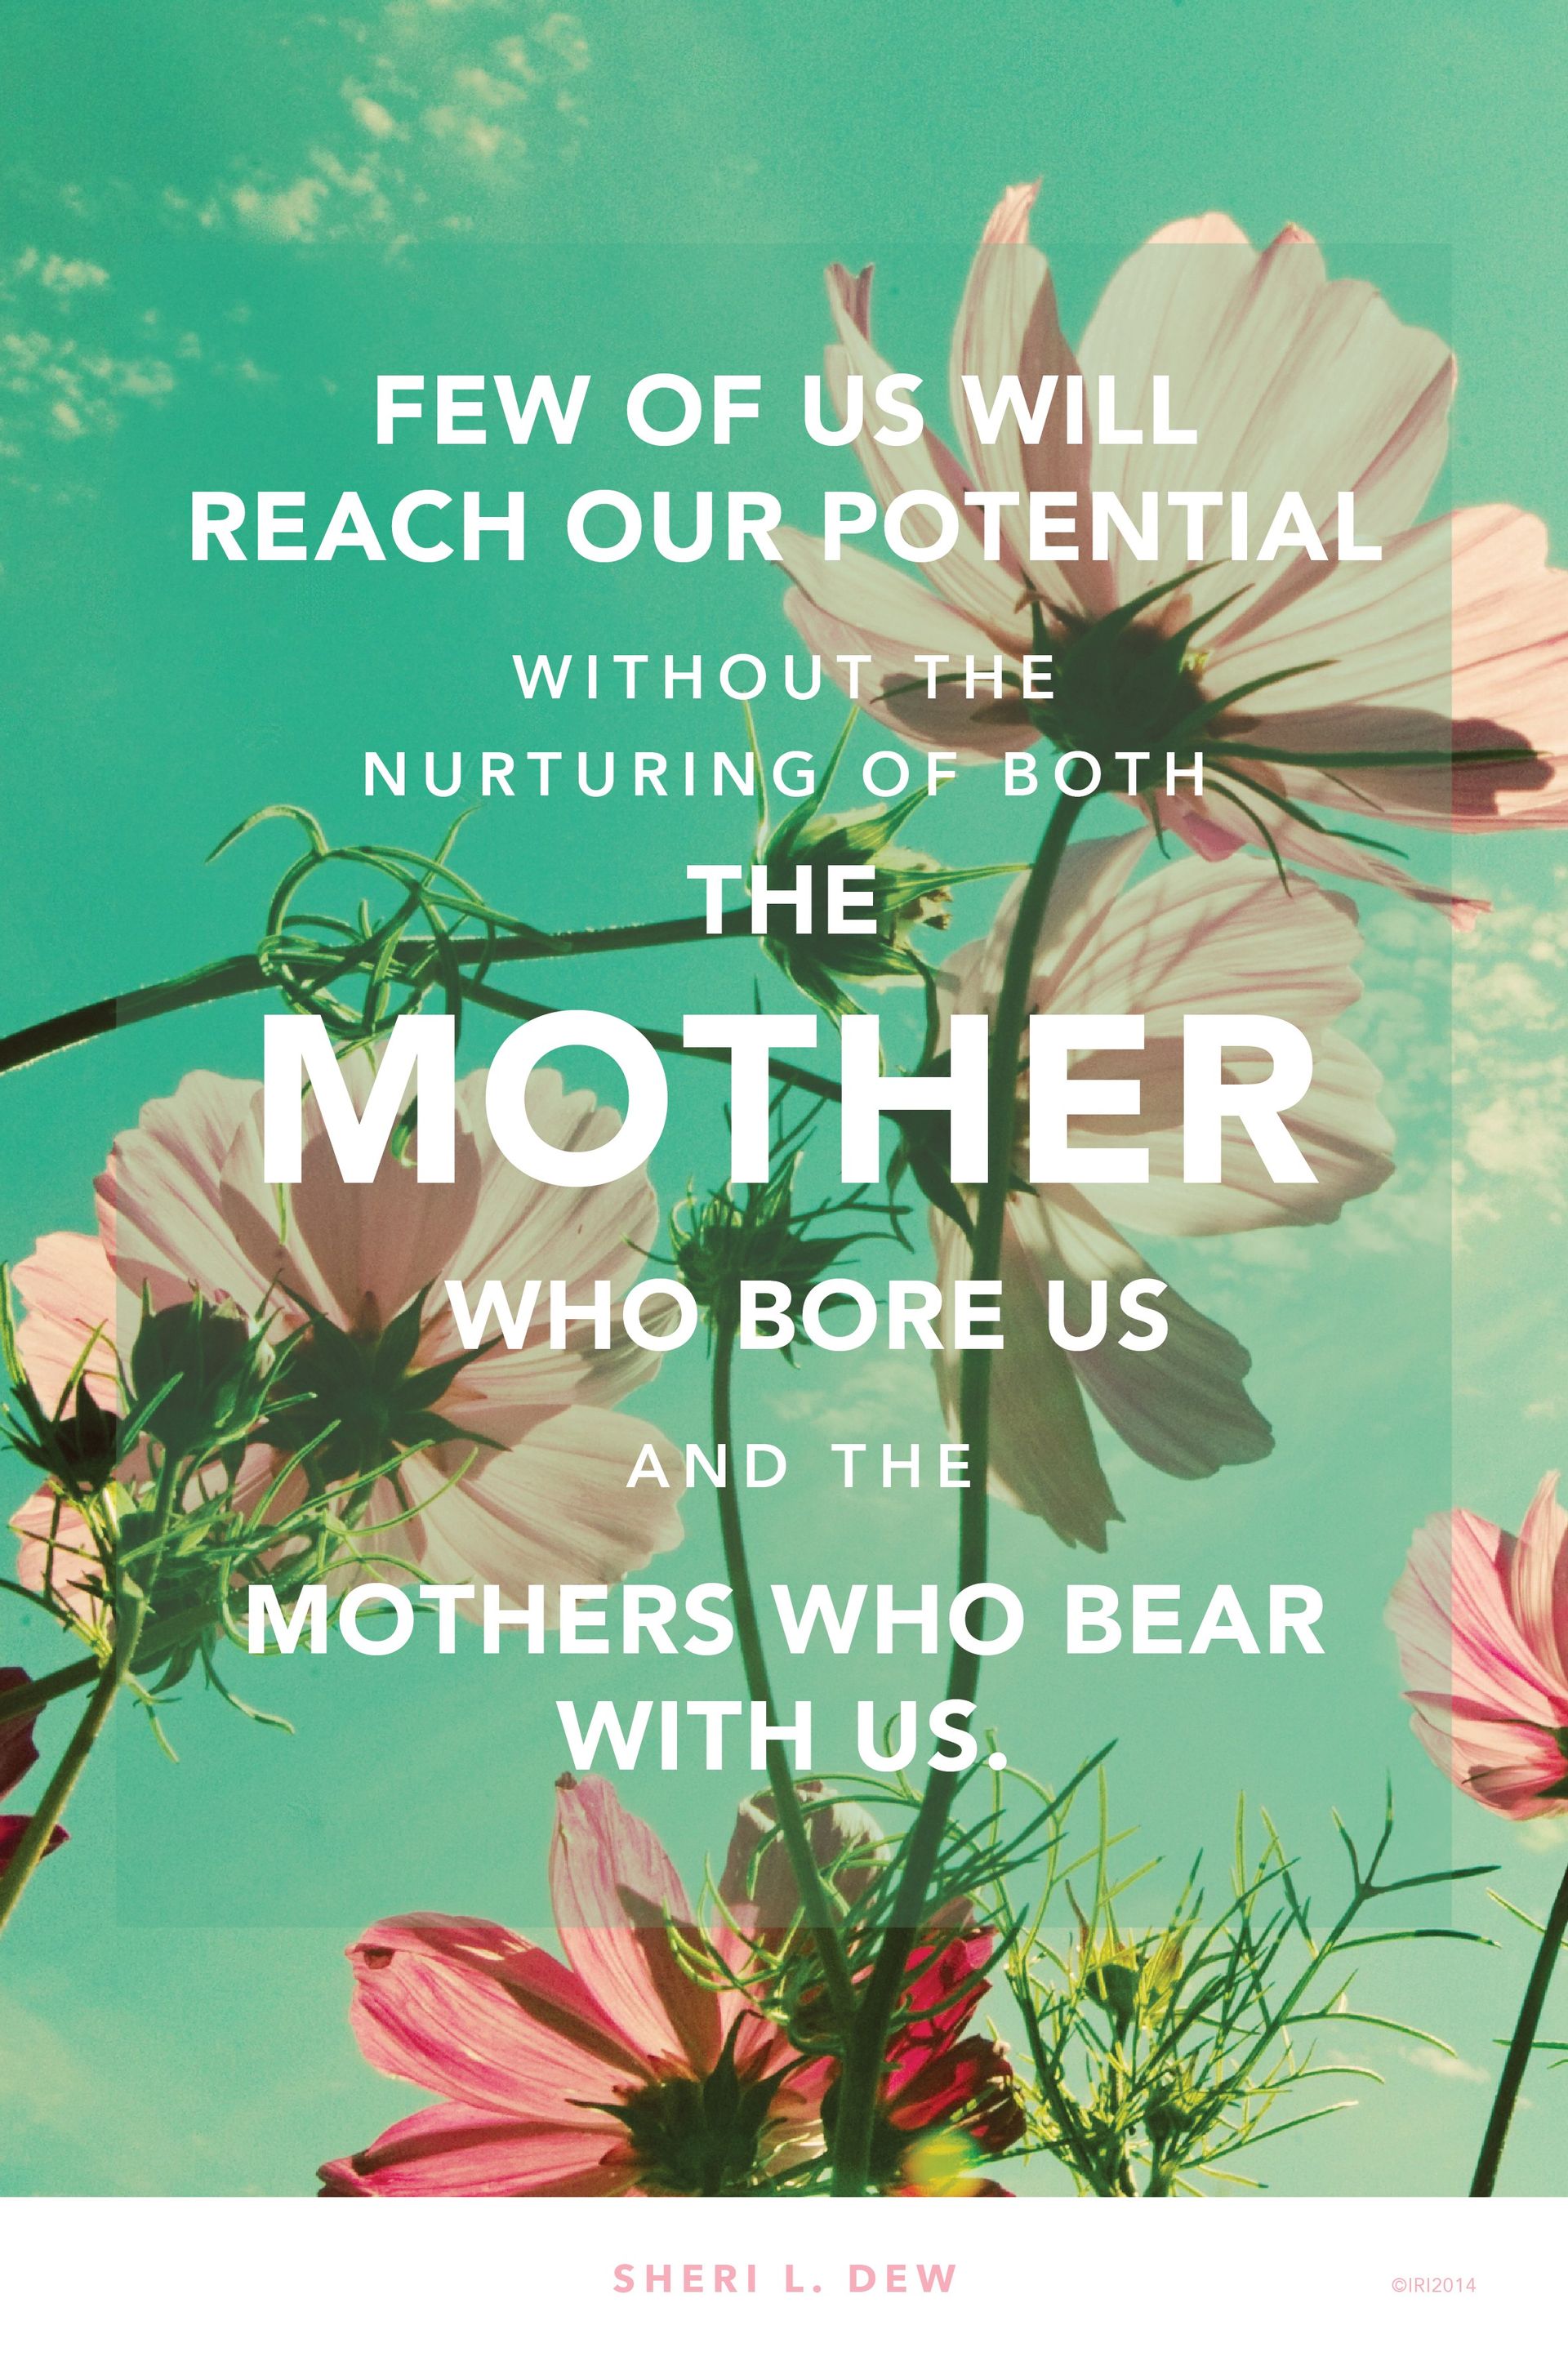 “Few of us will reach our potential without the nurturing of both the mother who bore us and the mothers who bear with us.”—Sister Sheri L. Dew, “Are We Not All Mothers?”